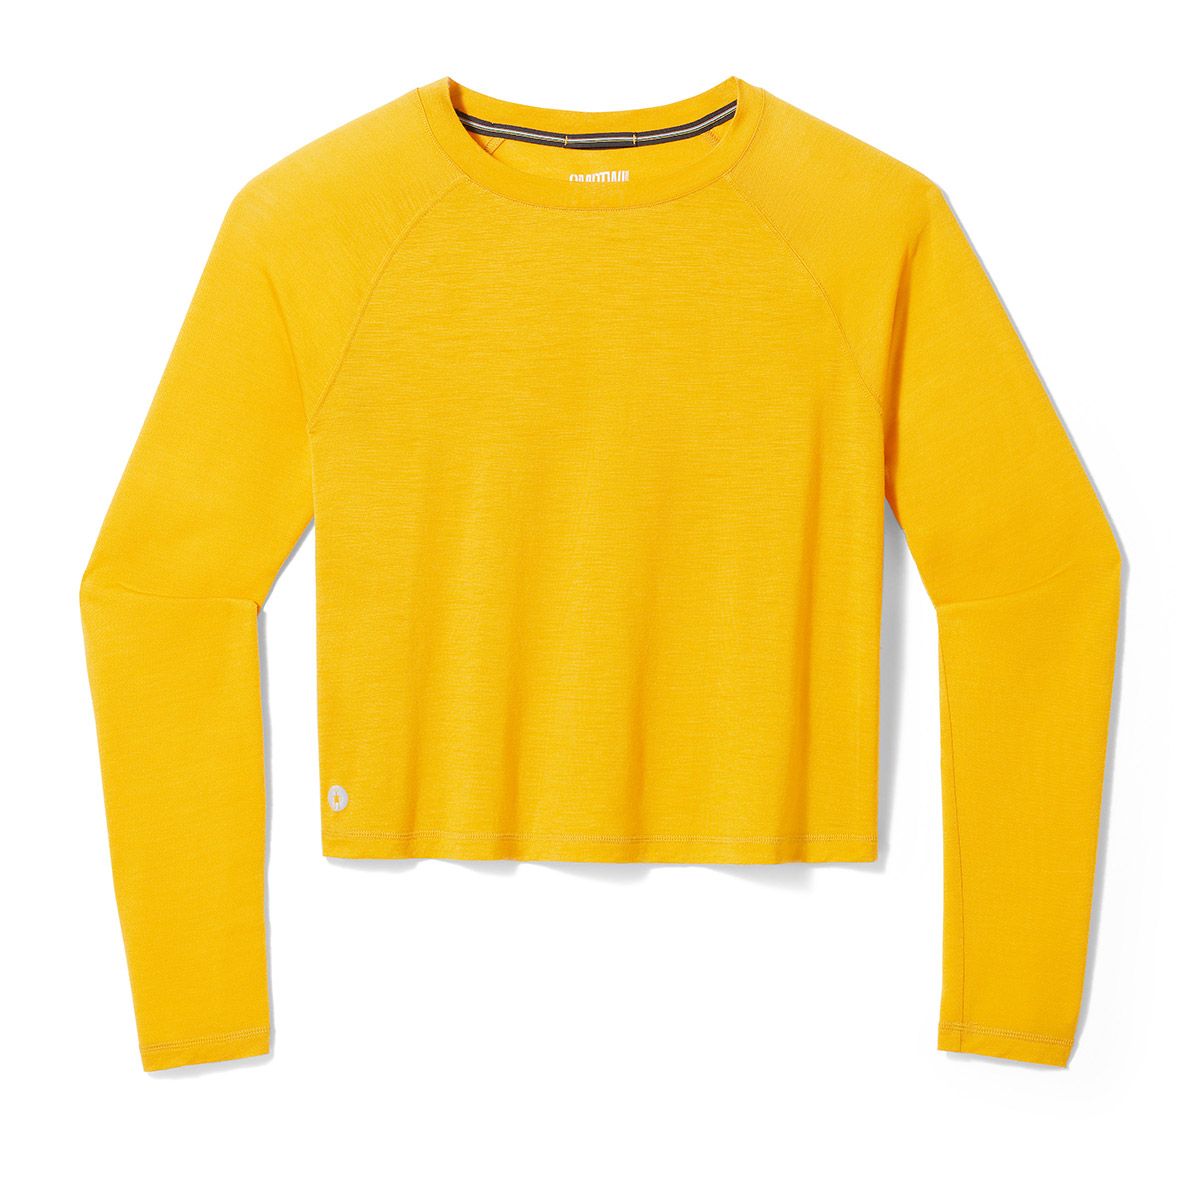 PLUS WIDE RAGLAN SLEEVE JERSEY TOP, Fashion Bug, Online Clothing Stores